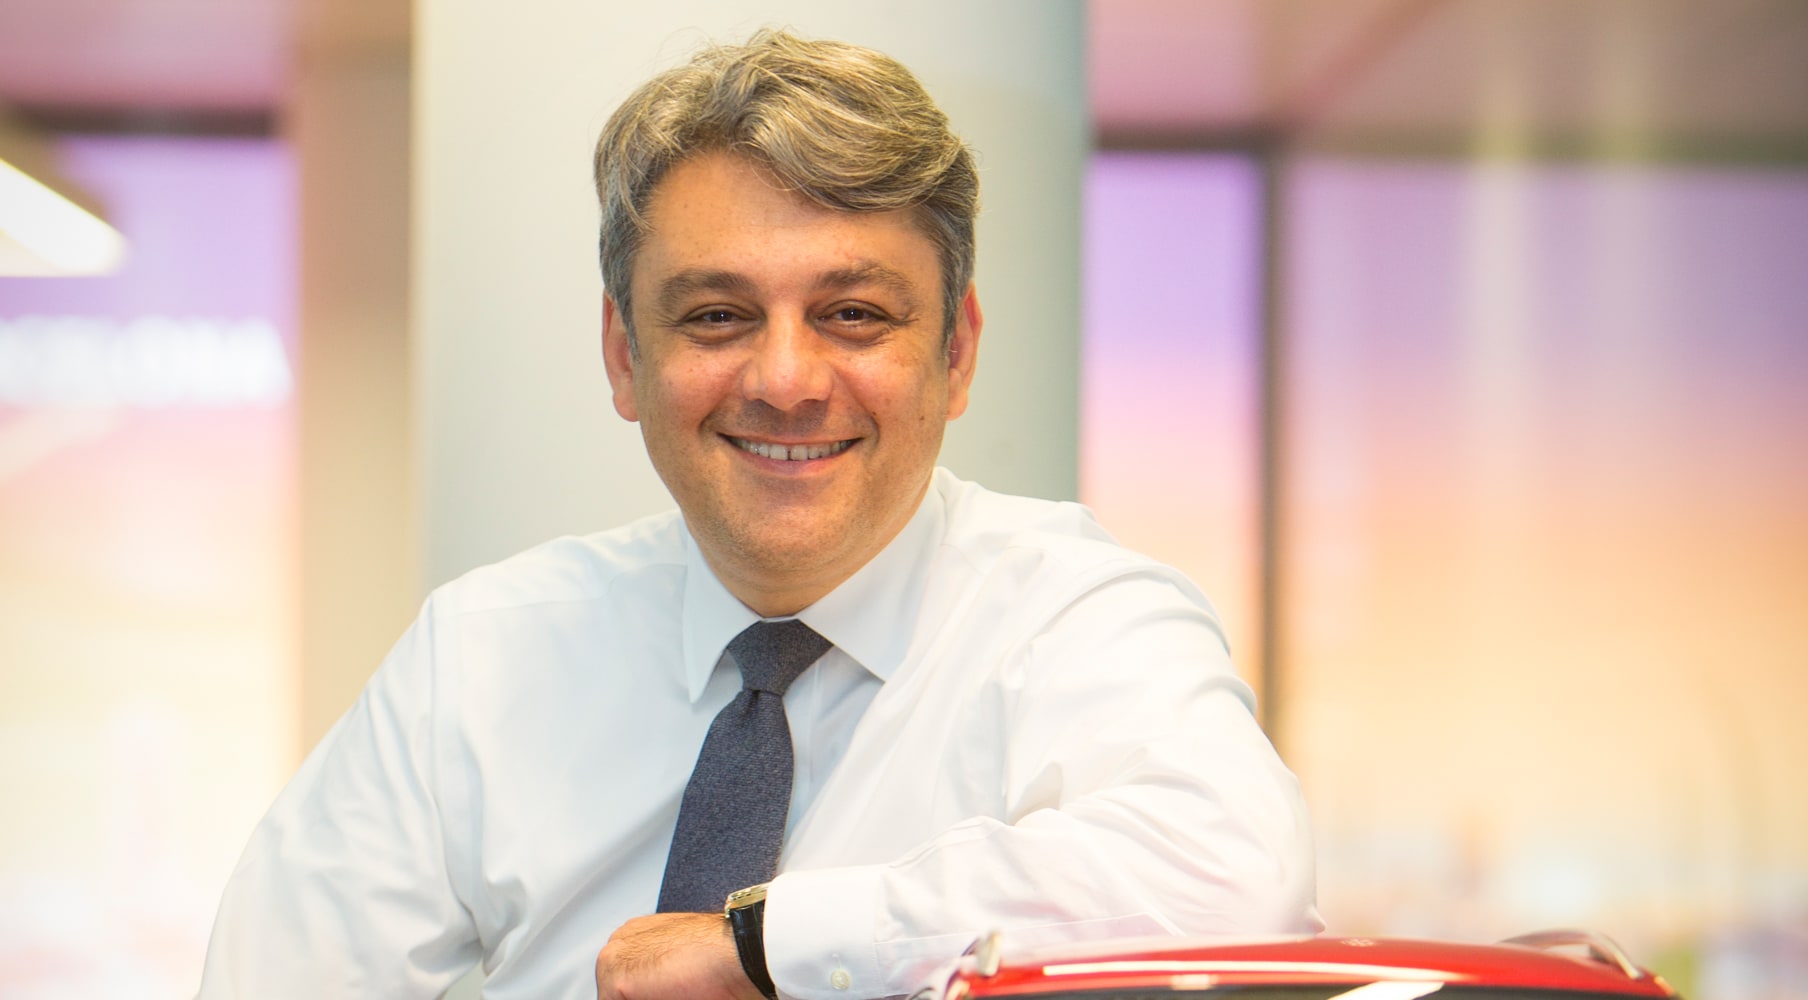 Luca de Meo: CEO and Chairman of the Executive Committee of SEAT, car manufacturing company of VW group.